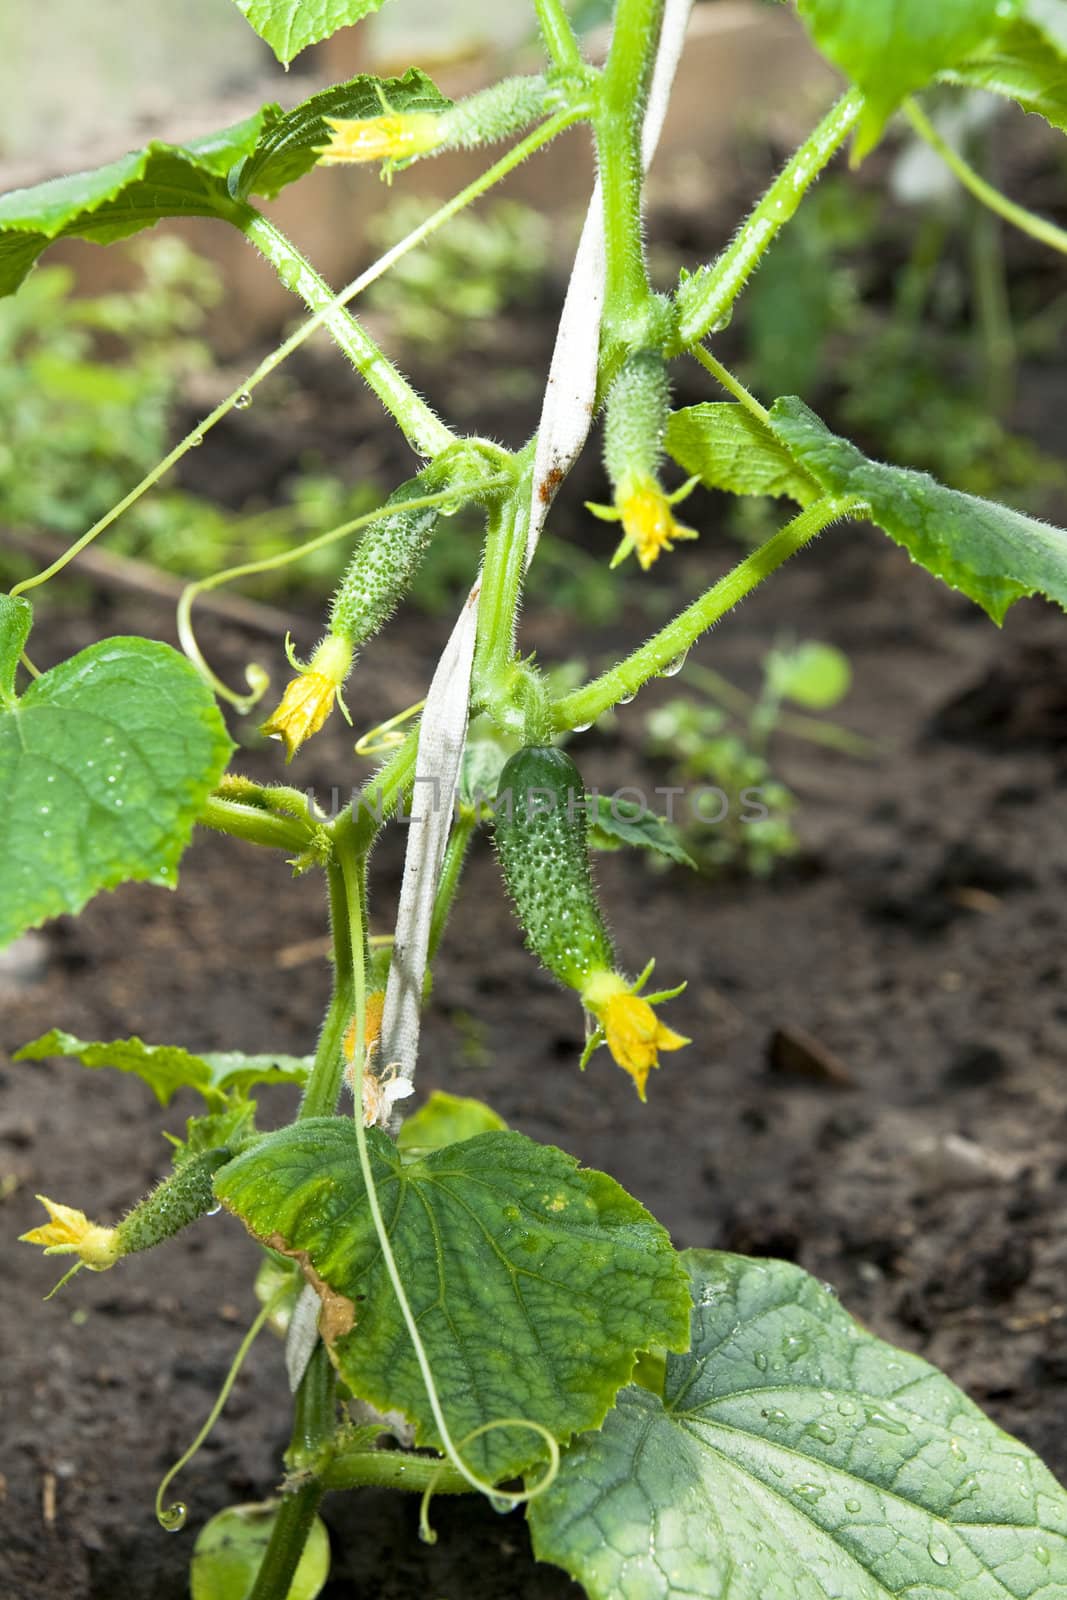 Small green cucumber with a flower